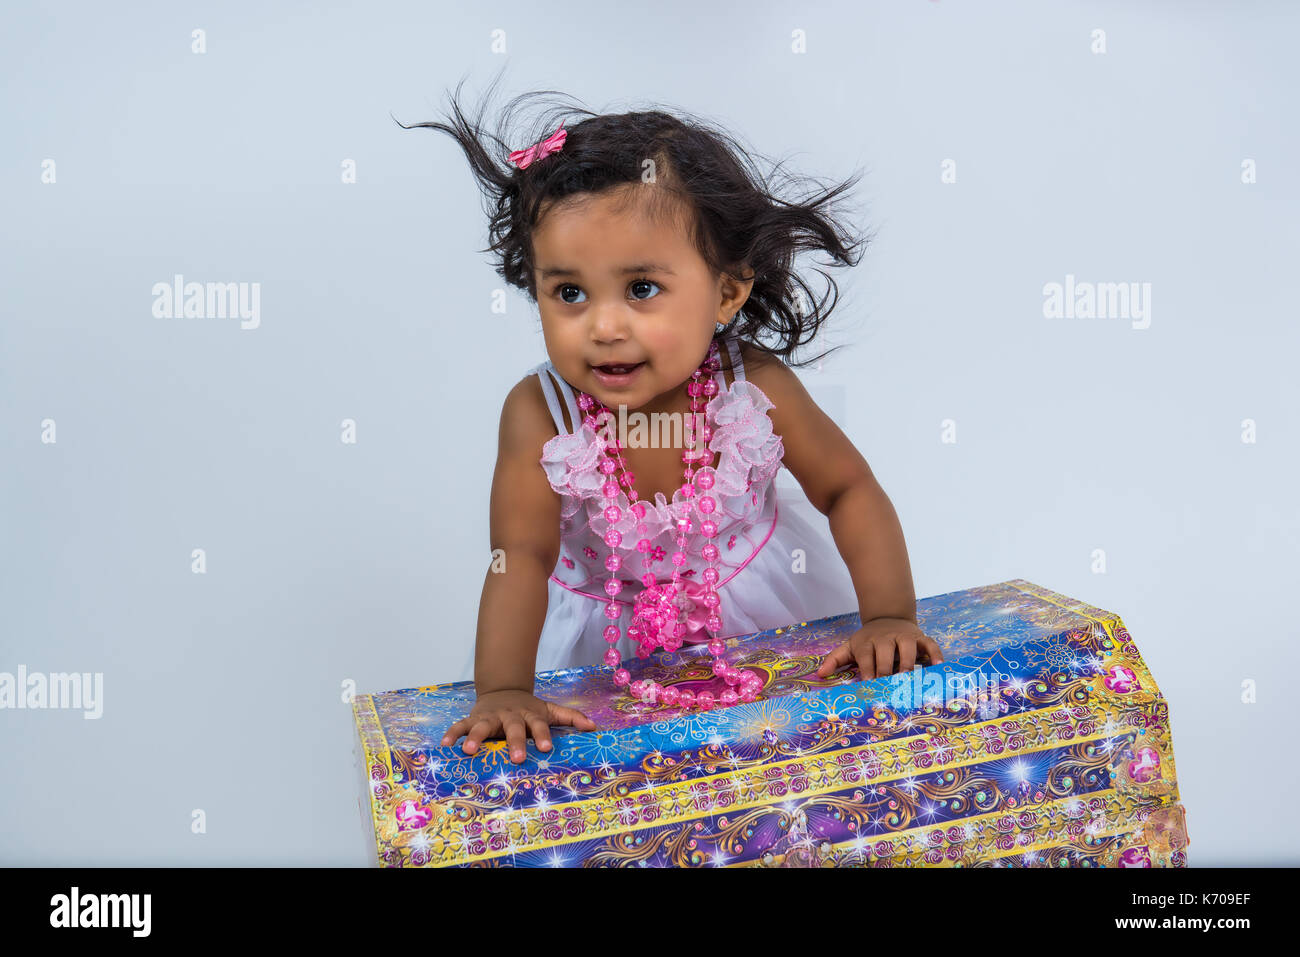 Cute toddler girl dress up in beads with her treasure chest Stock Photo